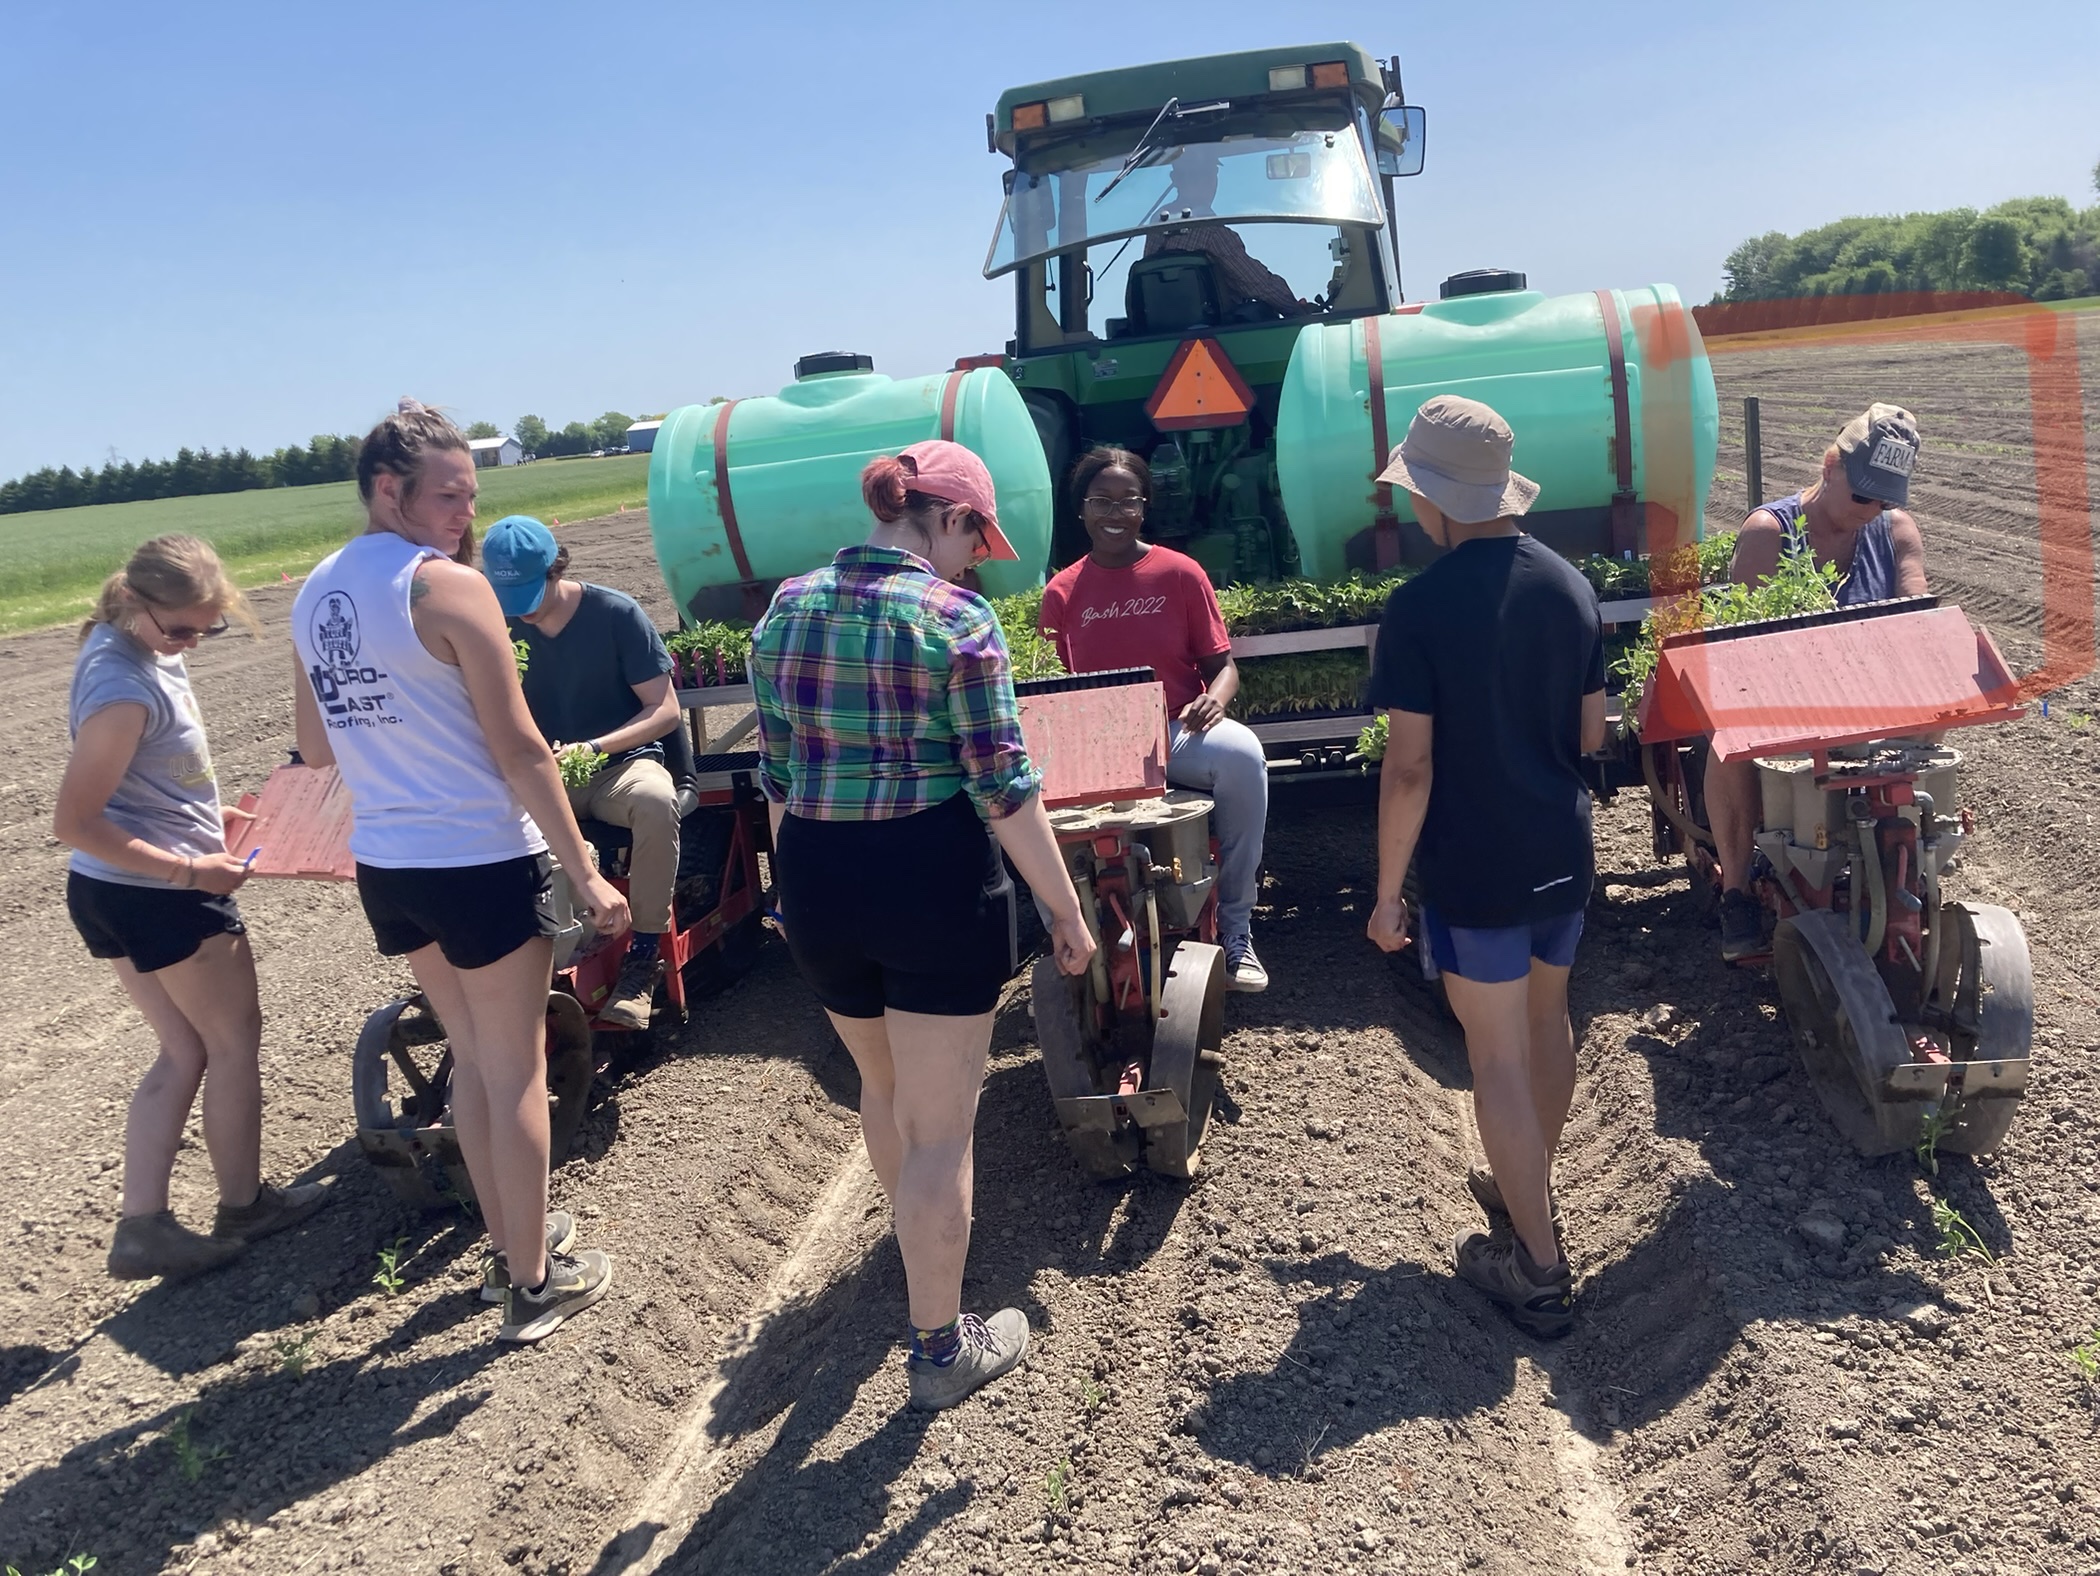 Aaron, Lydia, Maria, and Daniel Do plant tomatoes in Fremont, OH with the transplanter and the North Central Ag Research Station Farm Crew.